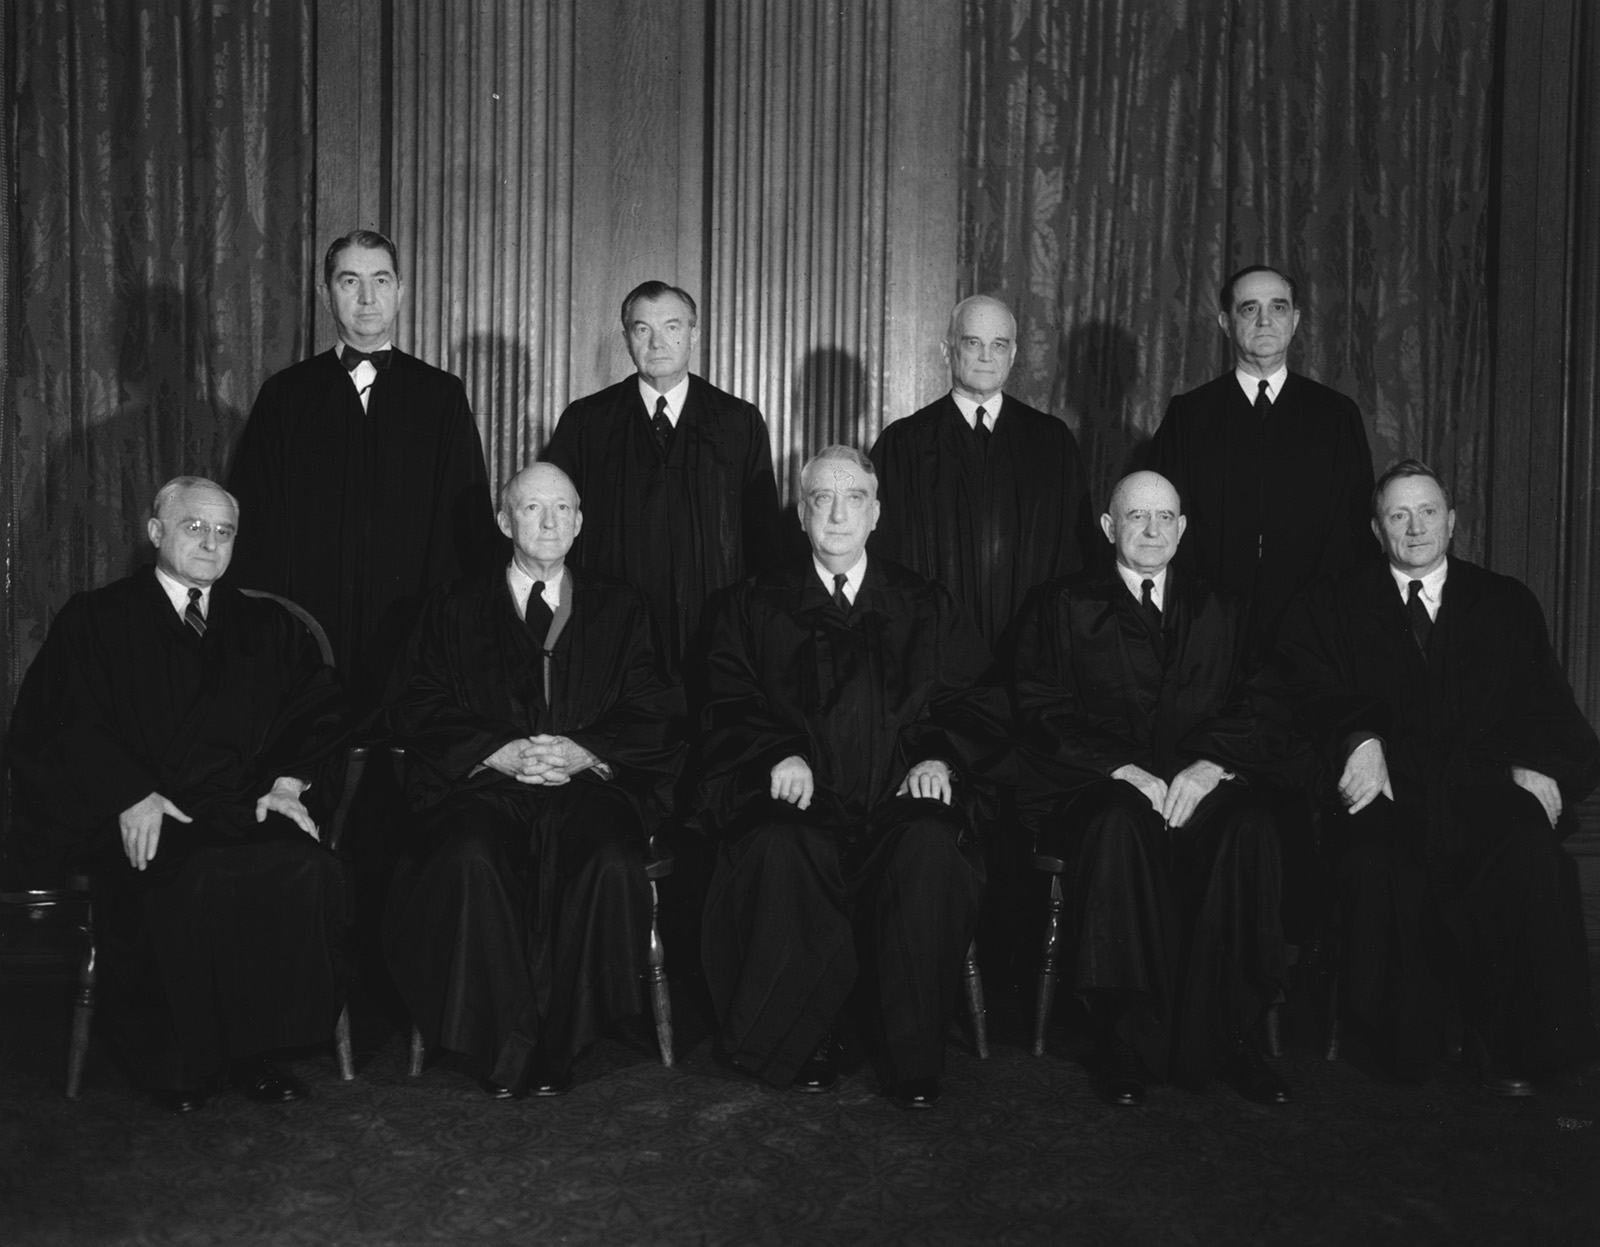 1952 portrait of the Supreme Court justices. Supreme Court of the United States.